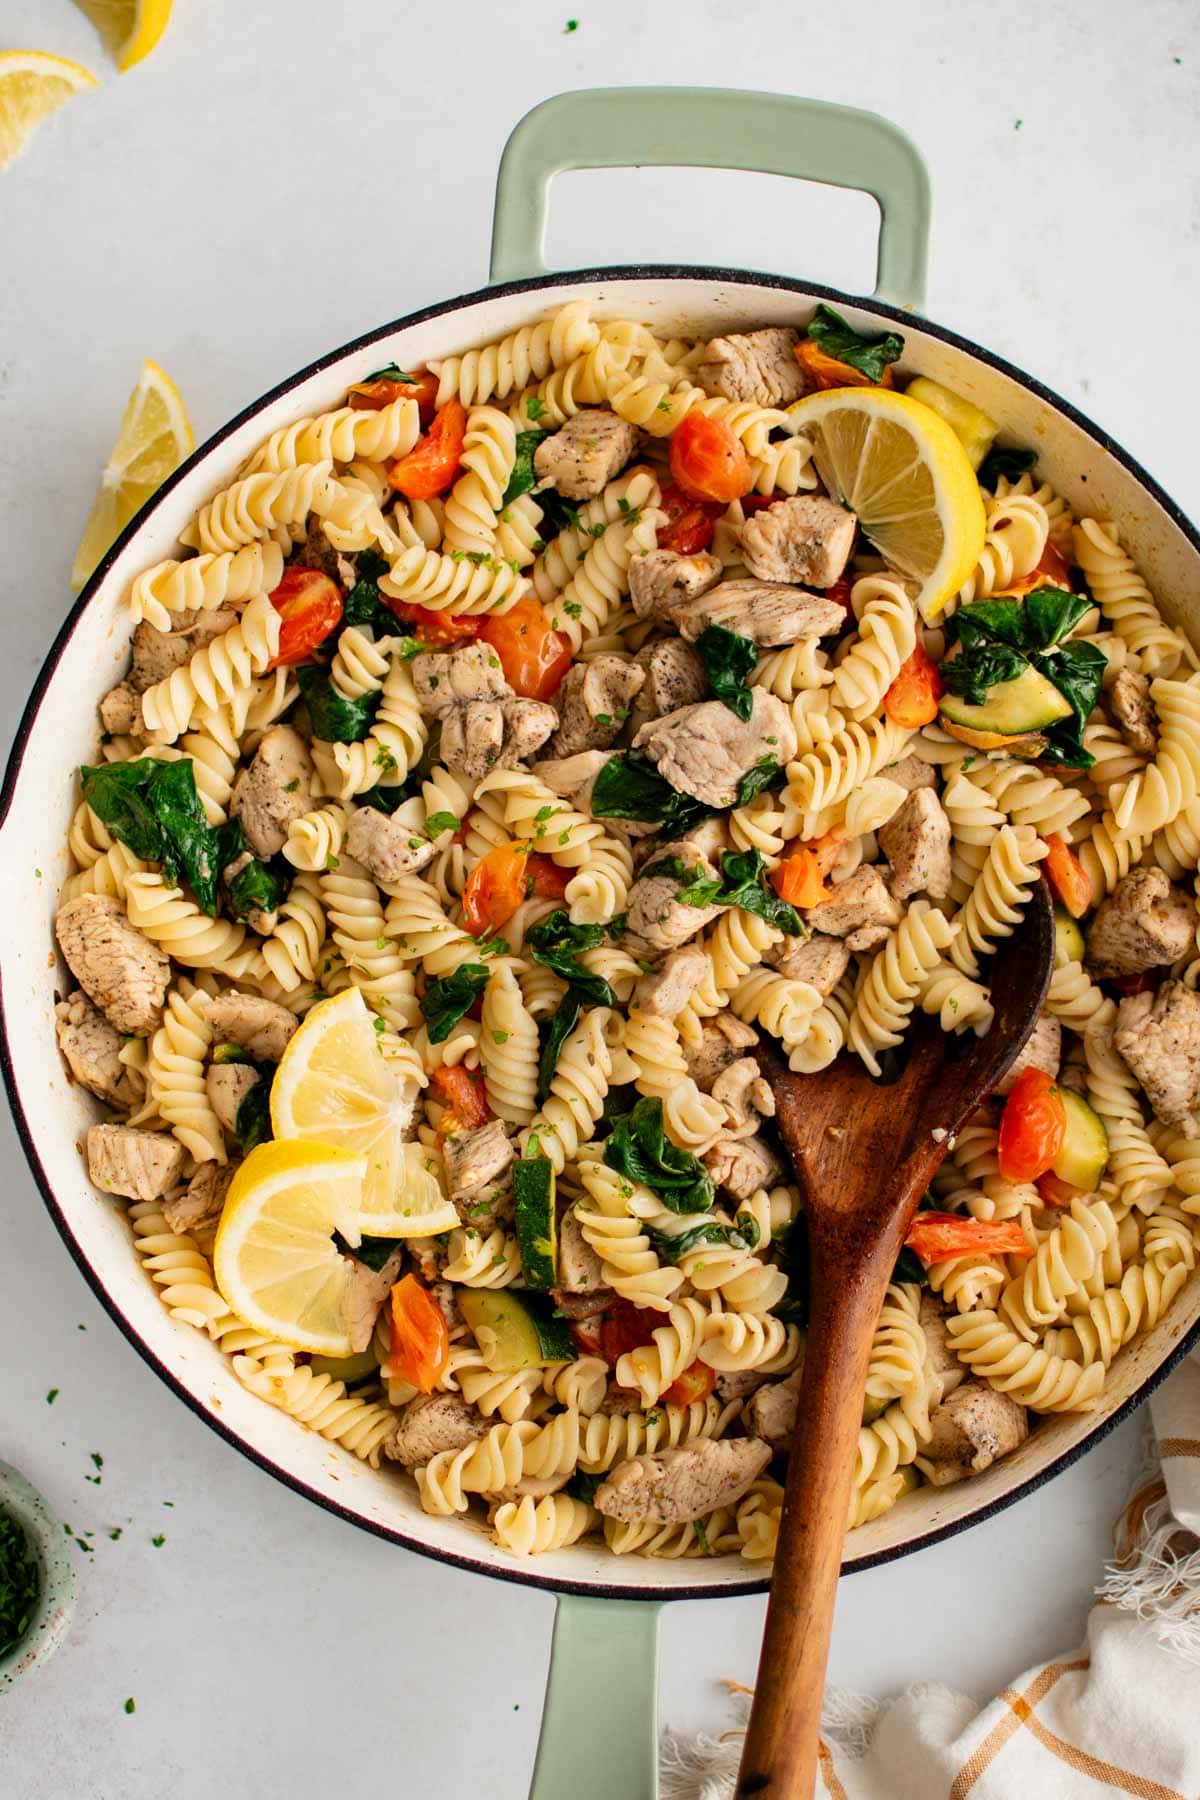 Large skillet with pasta, chicken and vegetables.